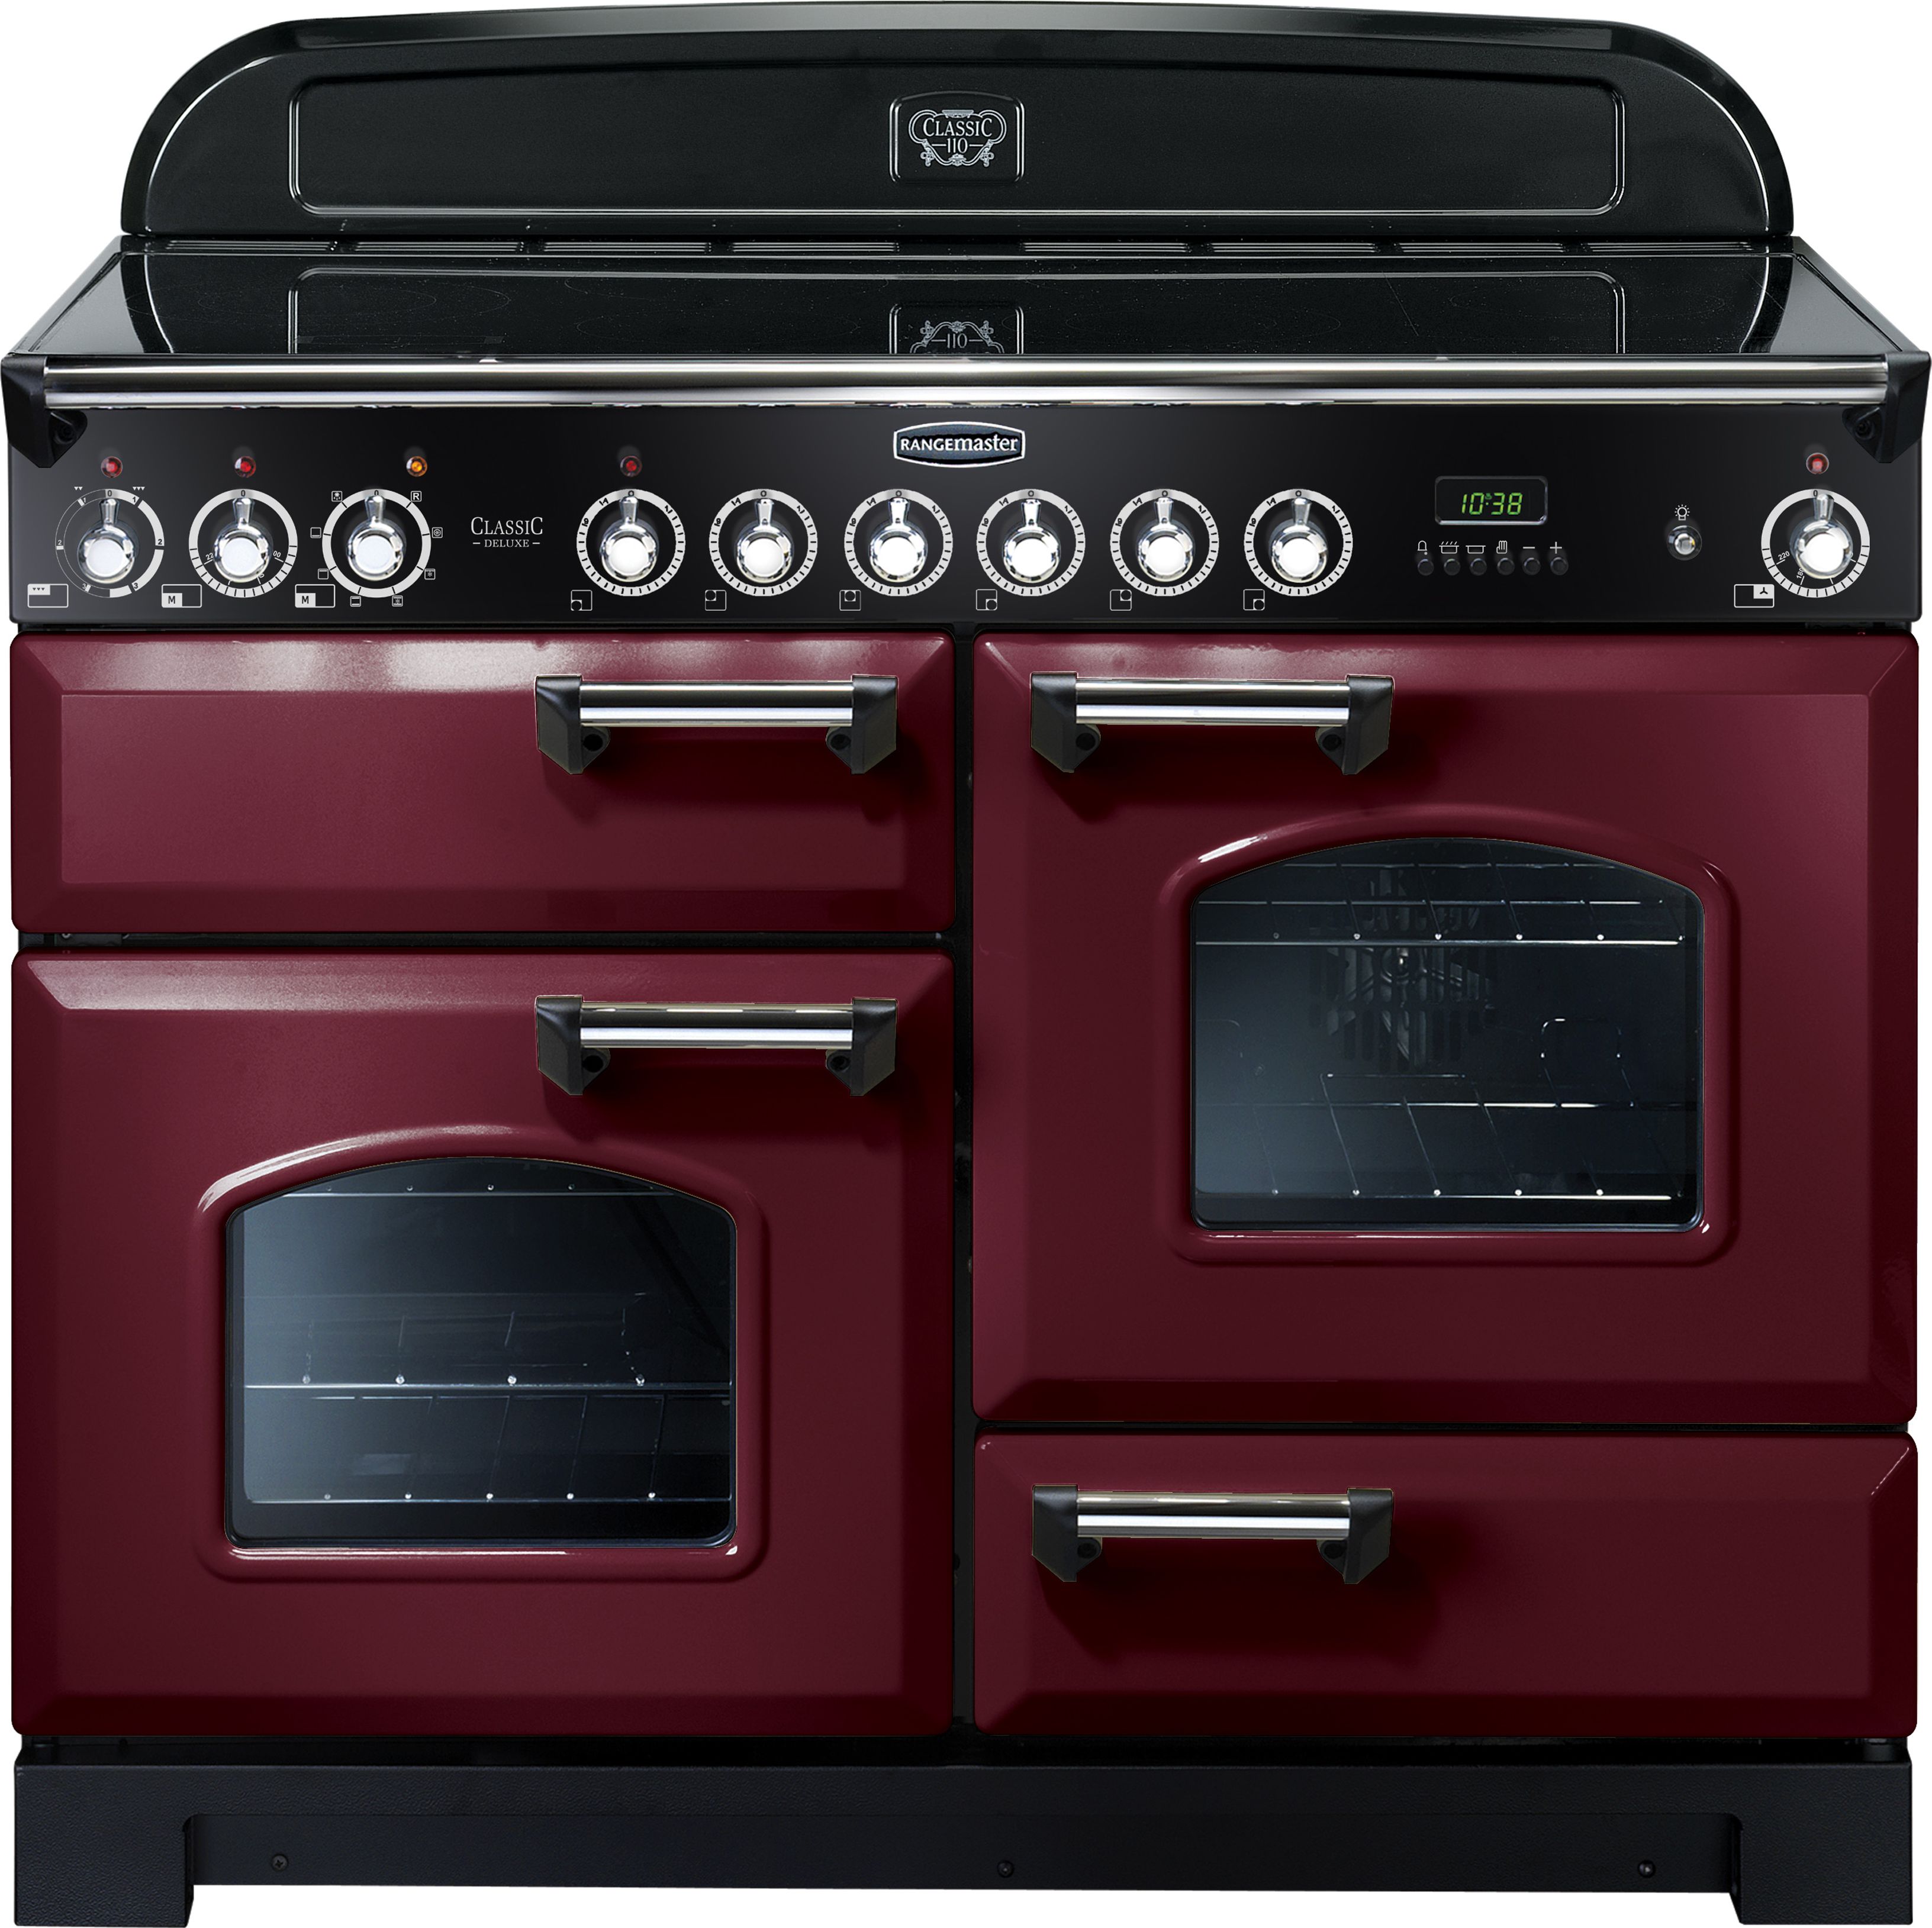 Rangemaster Classic Deluxe CDL110ECCY/C 110cm Electric Range Cooker with Ceramic Hob - Cranberry / Chrome - A/A Rated, Red